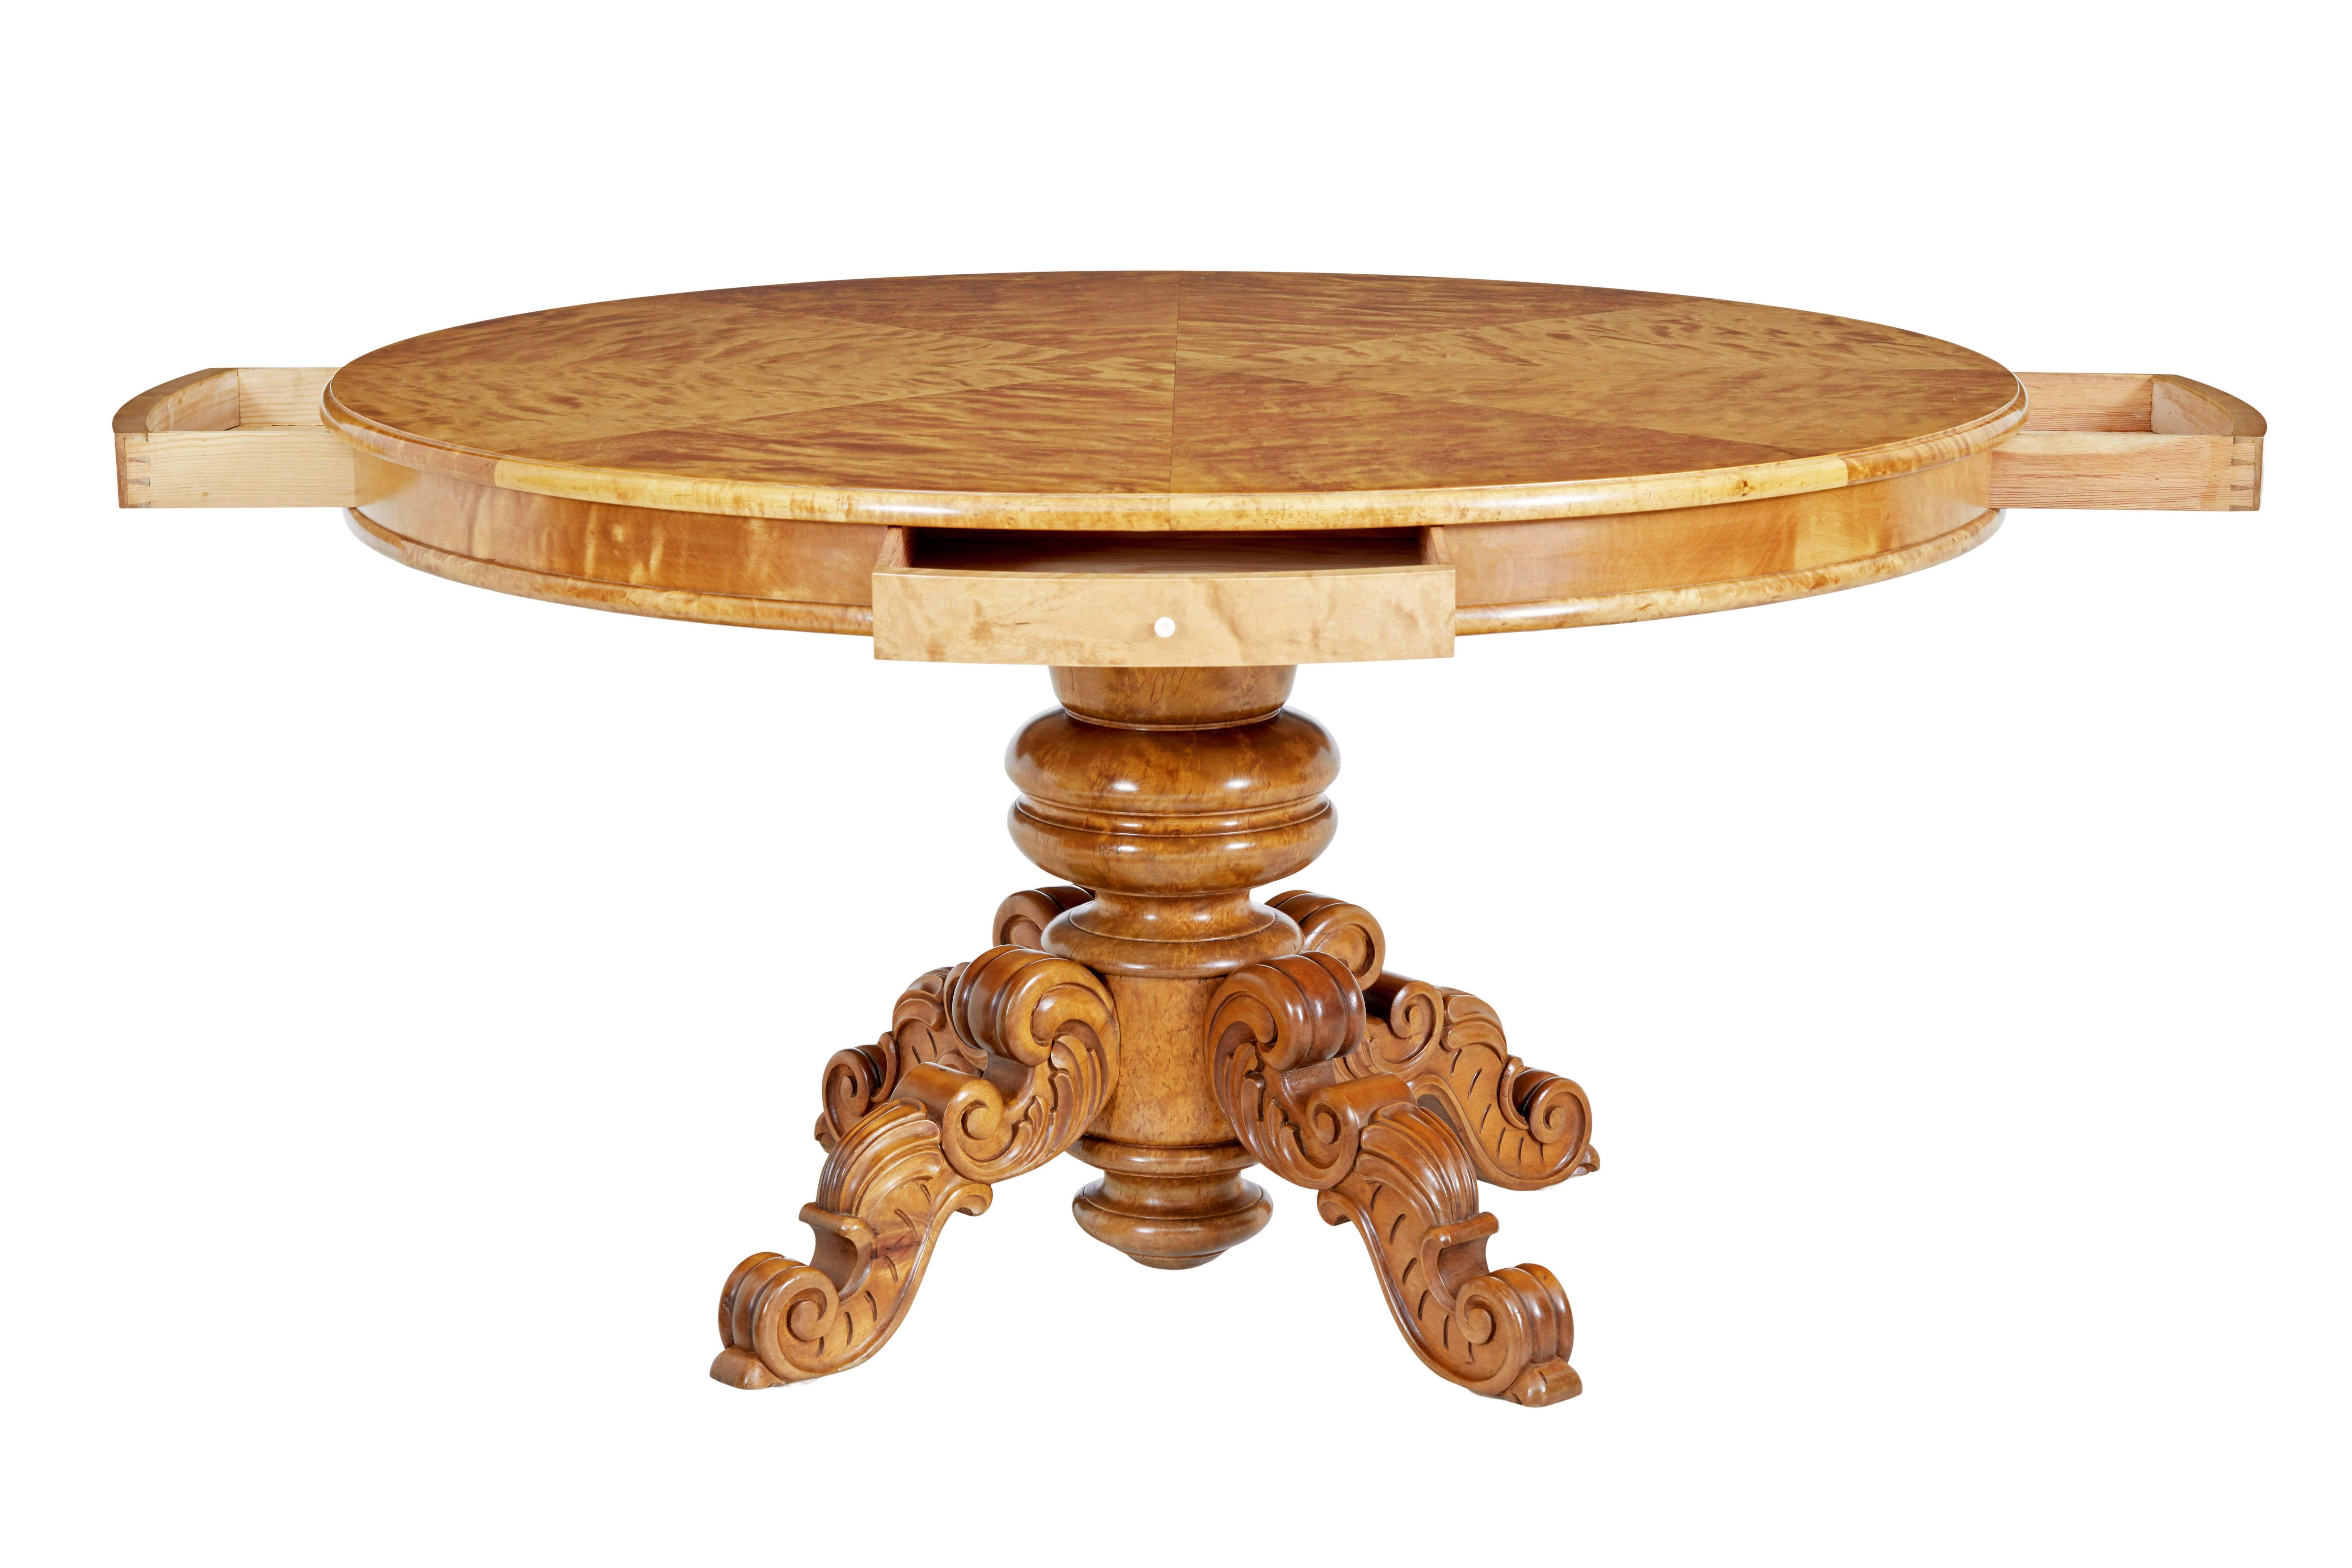 19th century birch Swedish carved drum centre table, circa 1890.

Know as a drum table but this table would function well as a dining table.

Large circular center table, with 4 shallow drawers placed at equal positions around the edge. Top arranged